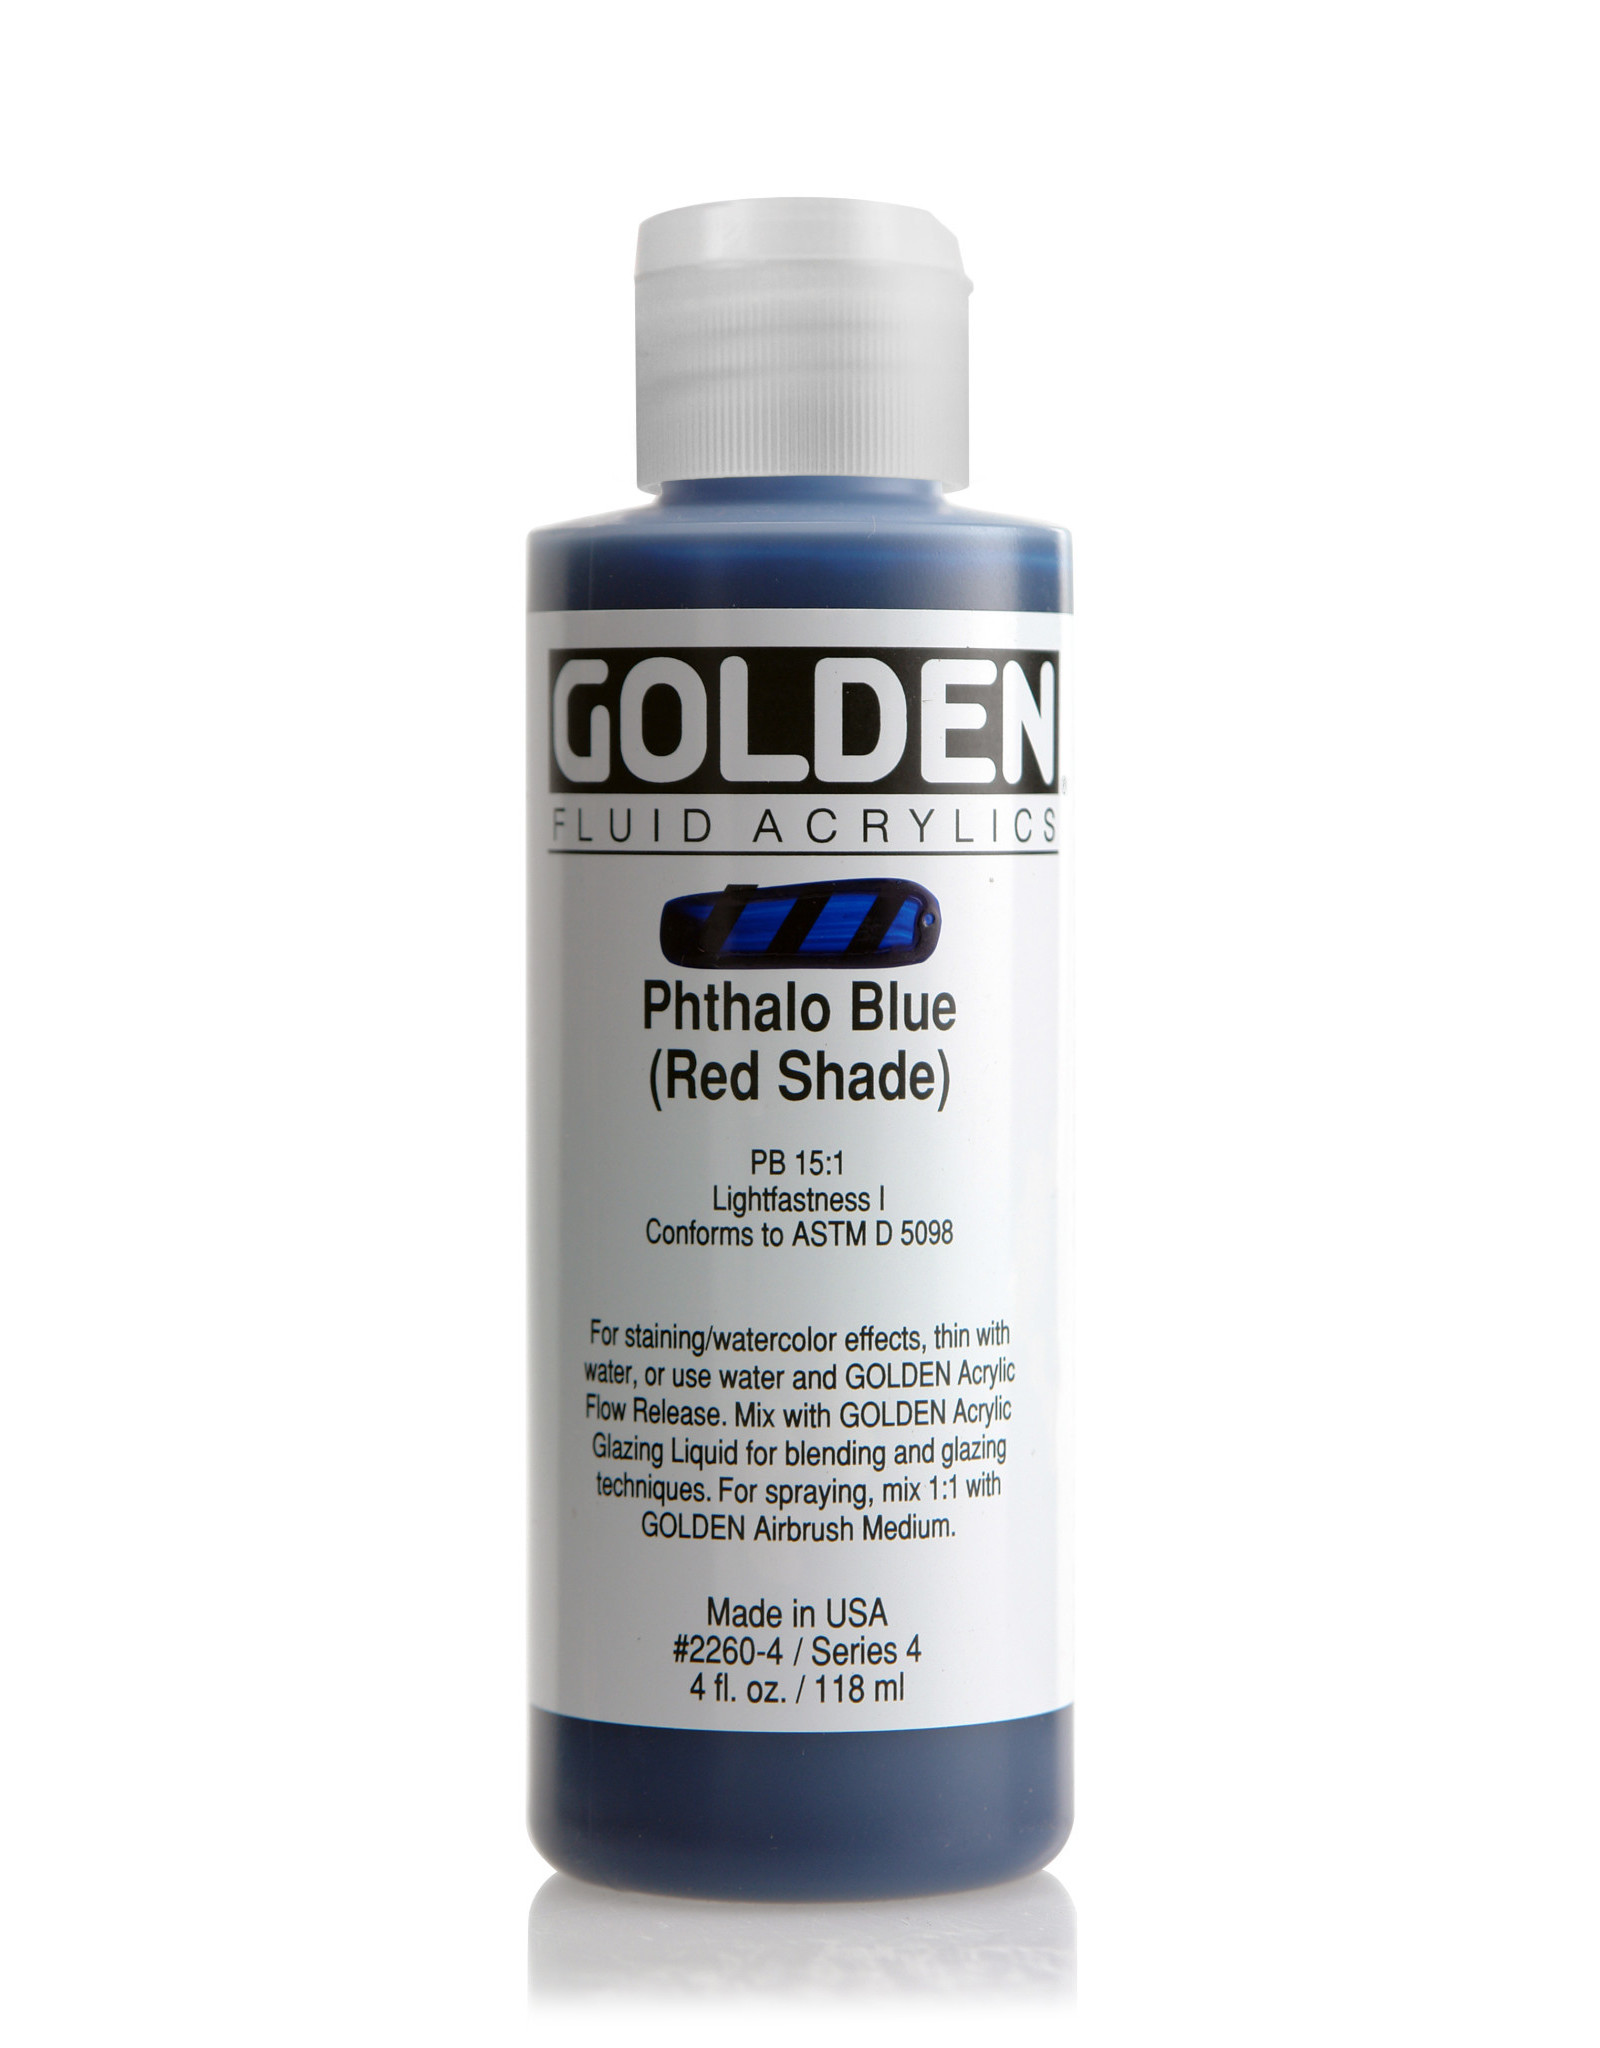 Golden Golden Fluid Acrylics, Phthalo Blue (Red Shade) 4oz Cylinder